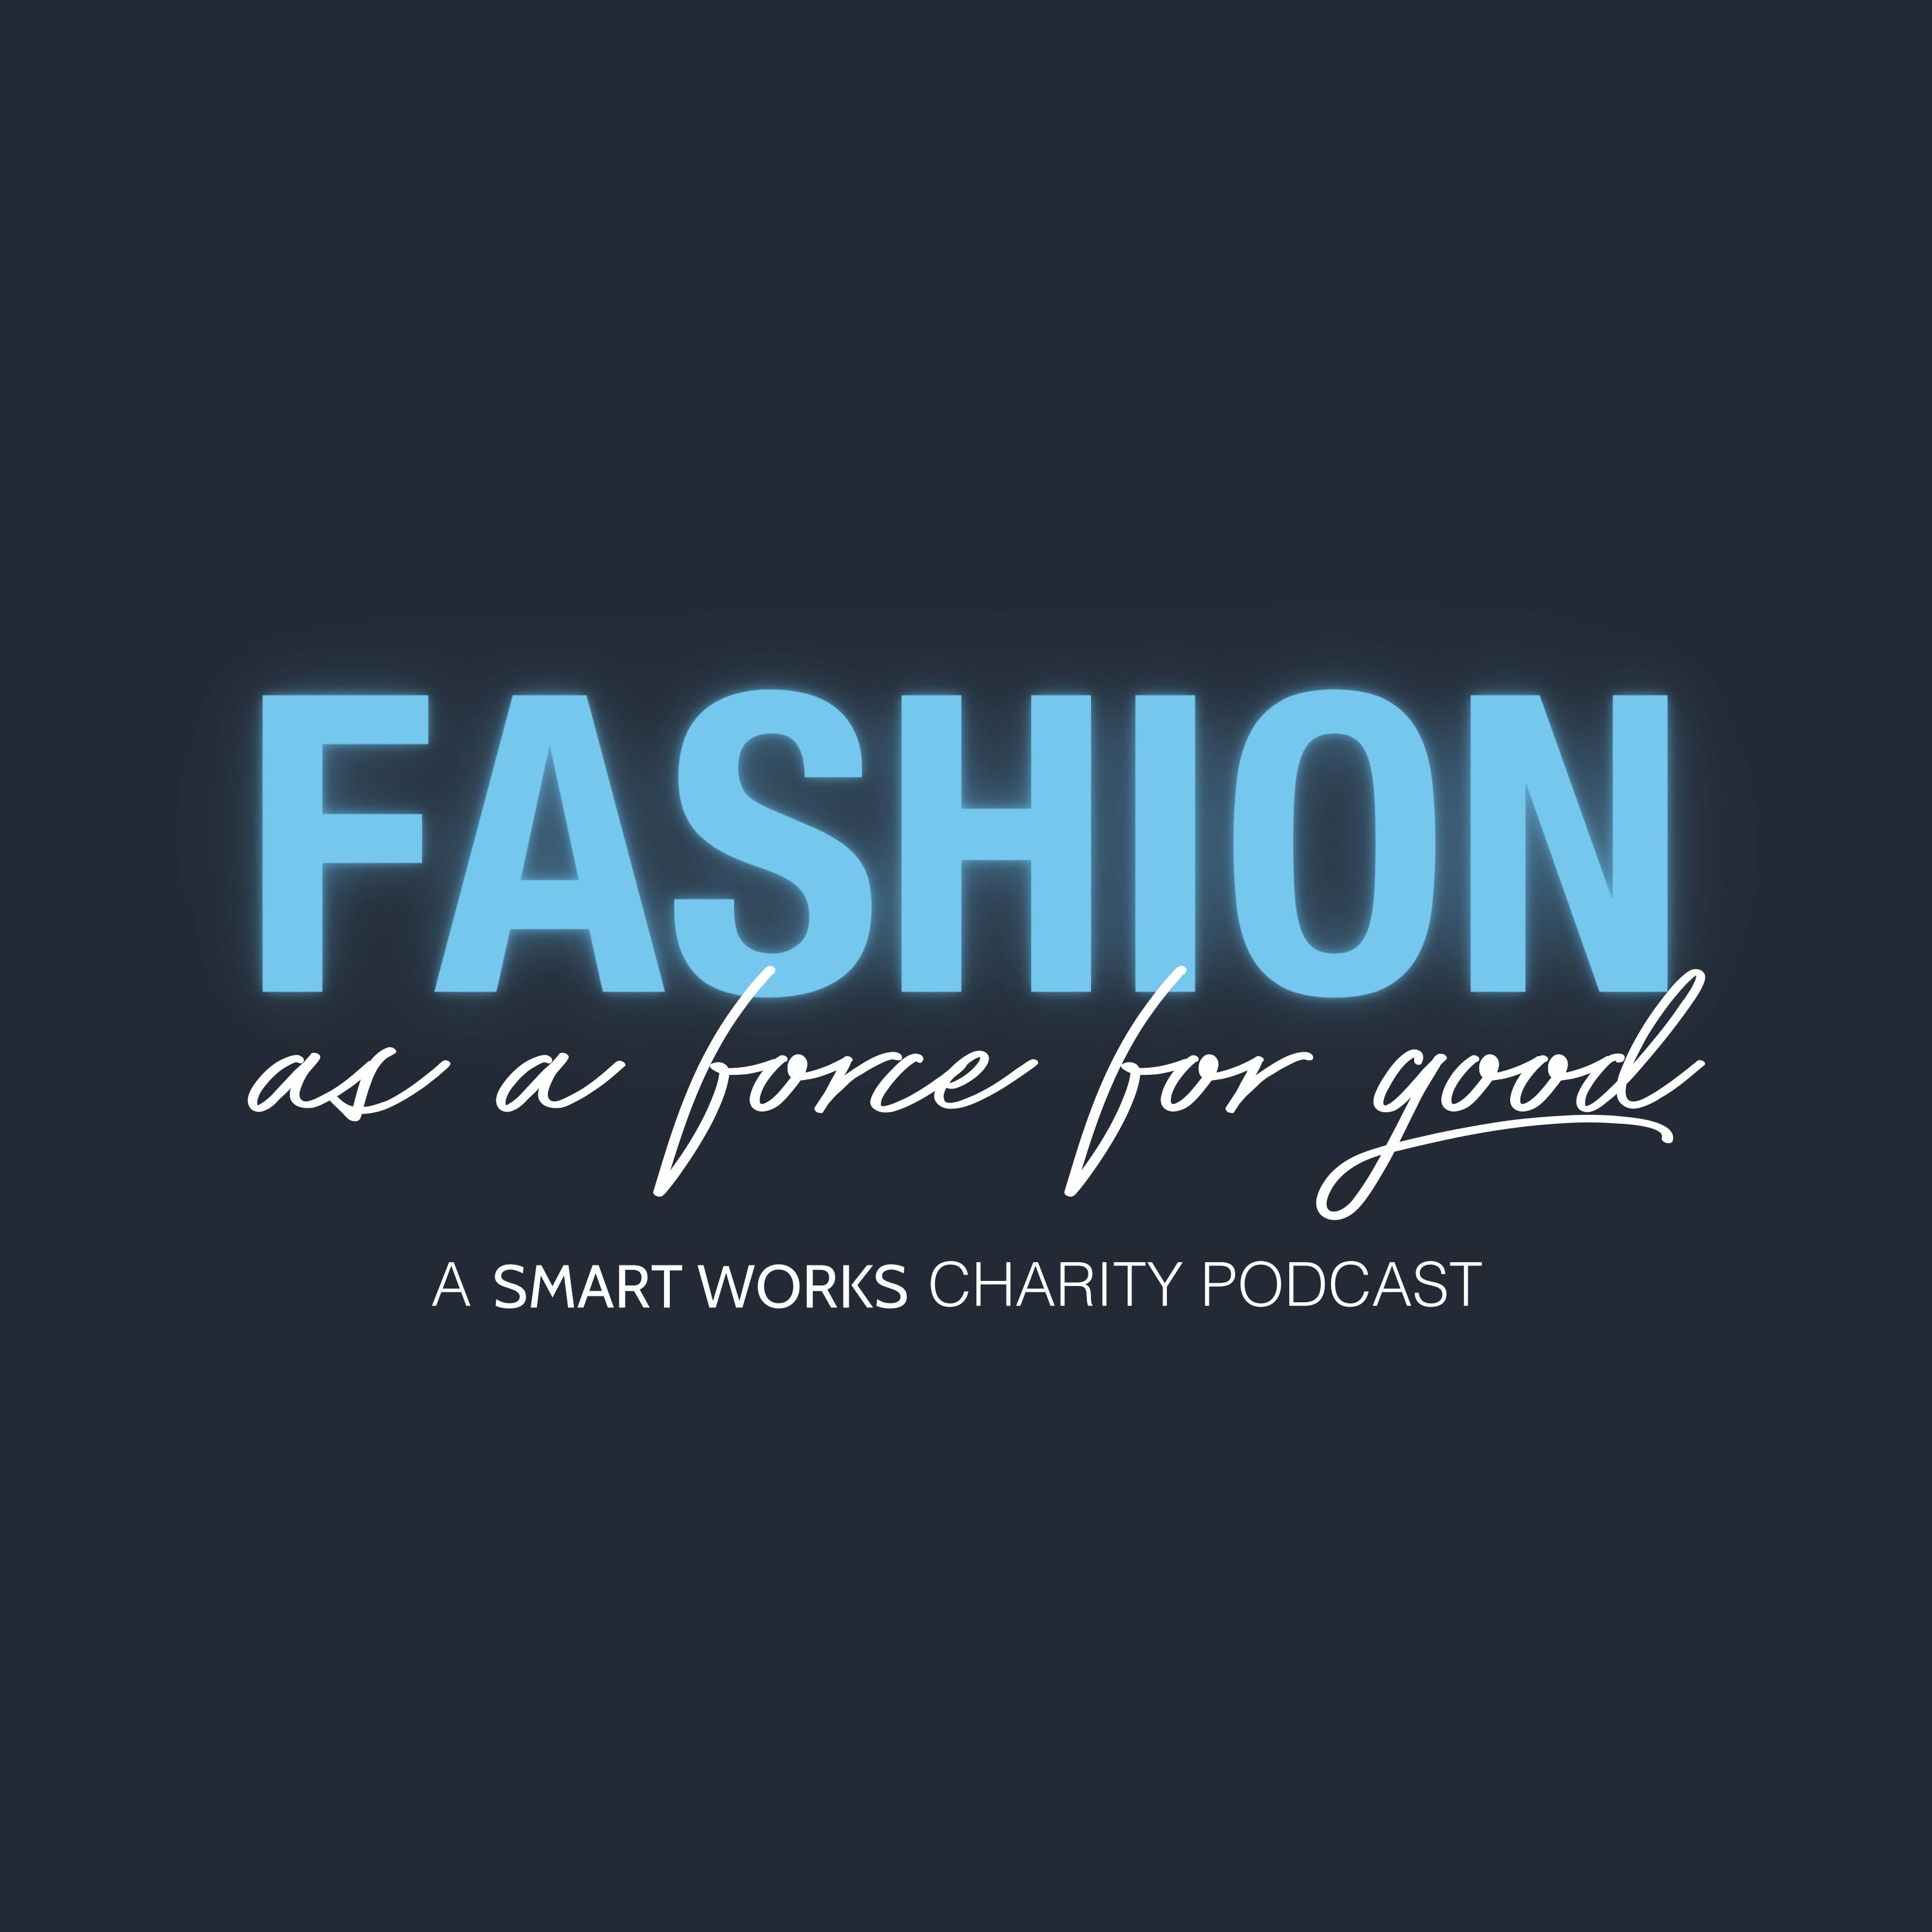 Introducing: Fashion as a Force for Good